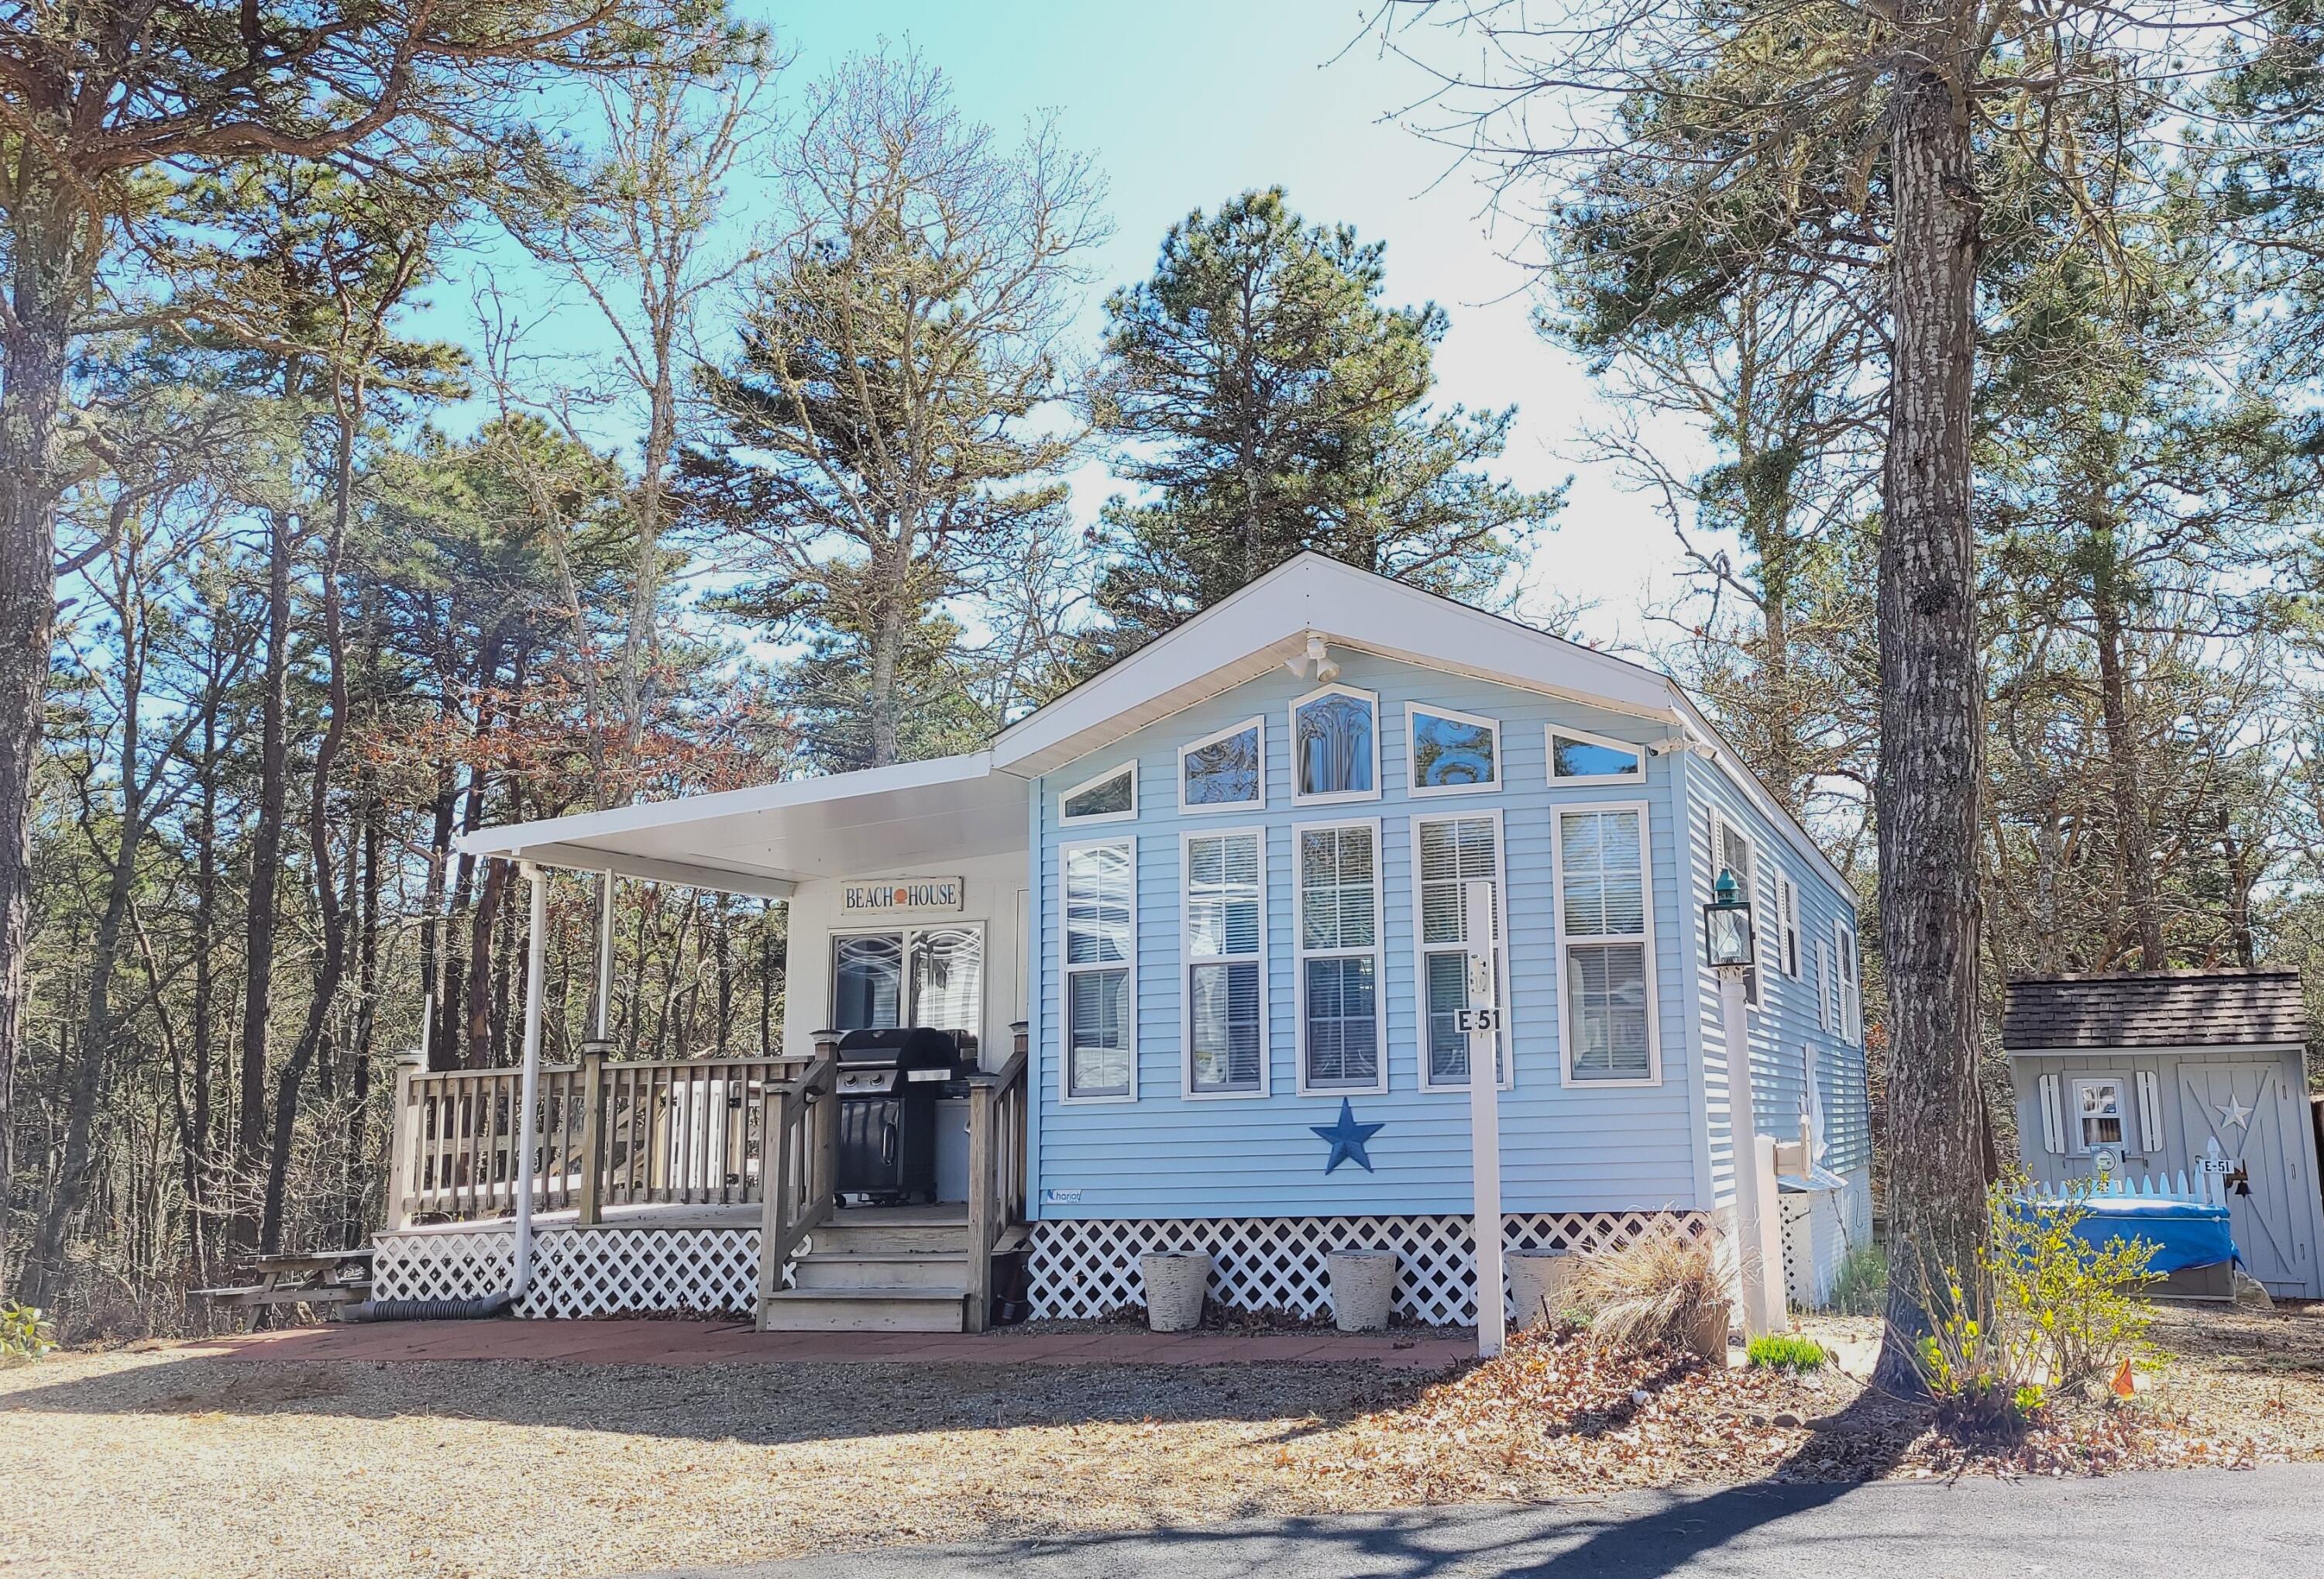 310 Old Chatham Road # 51, South Dennis, Massachusetts 02660, 1 Bedroom Bedrooms, 4 Rooms Rooms,1 BathroomBathrooms,Residential,For Sale,310 Old Chatham Road # 51,22401830